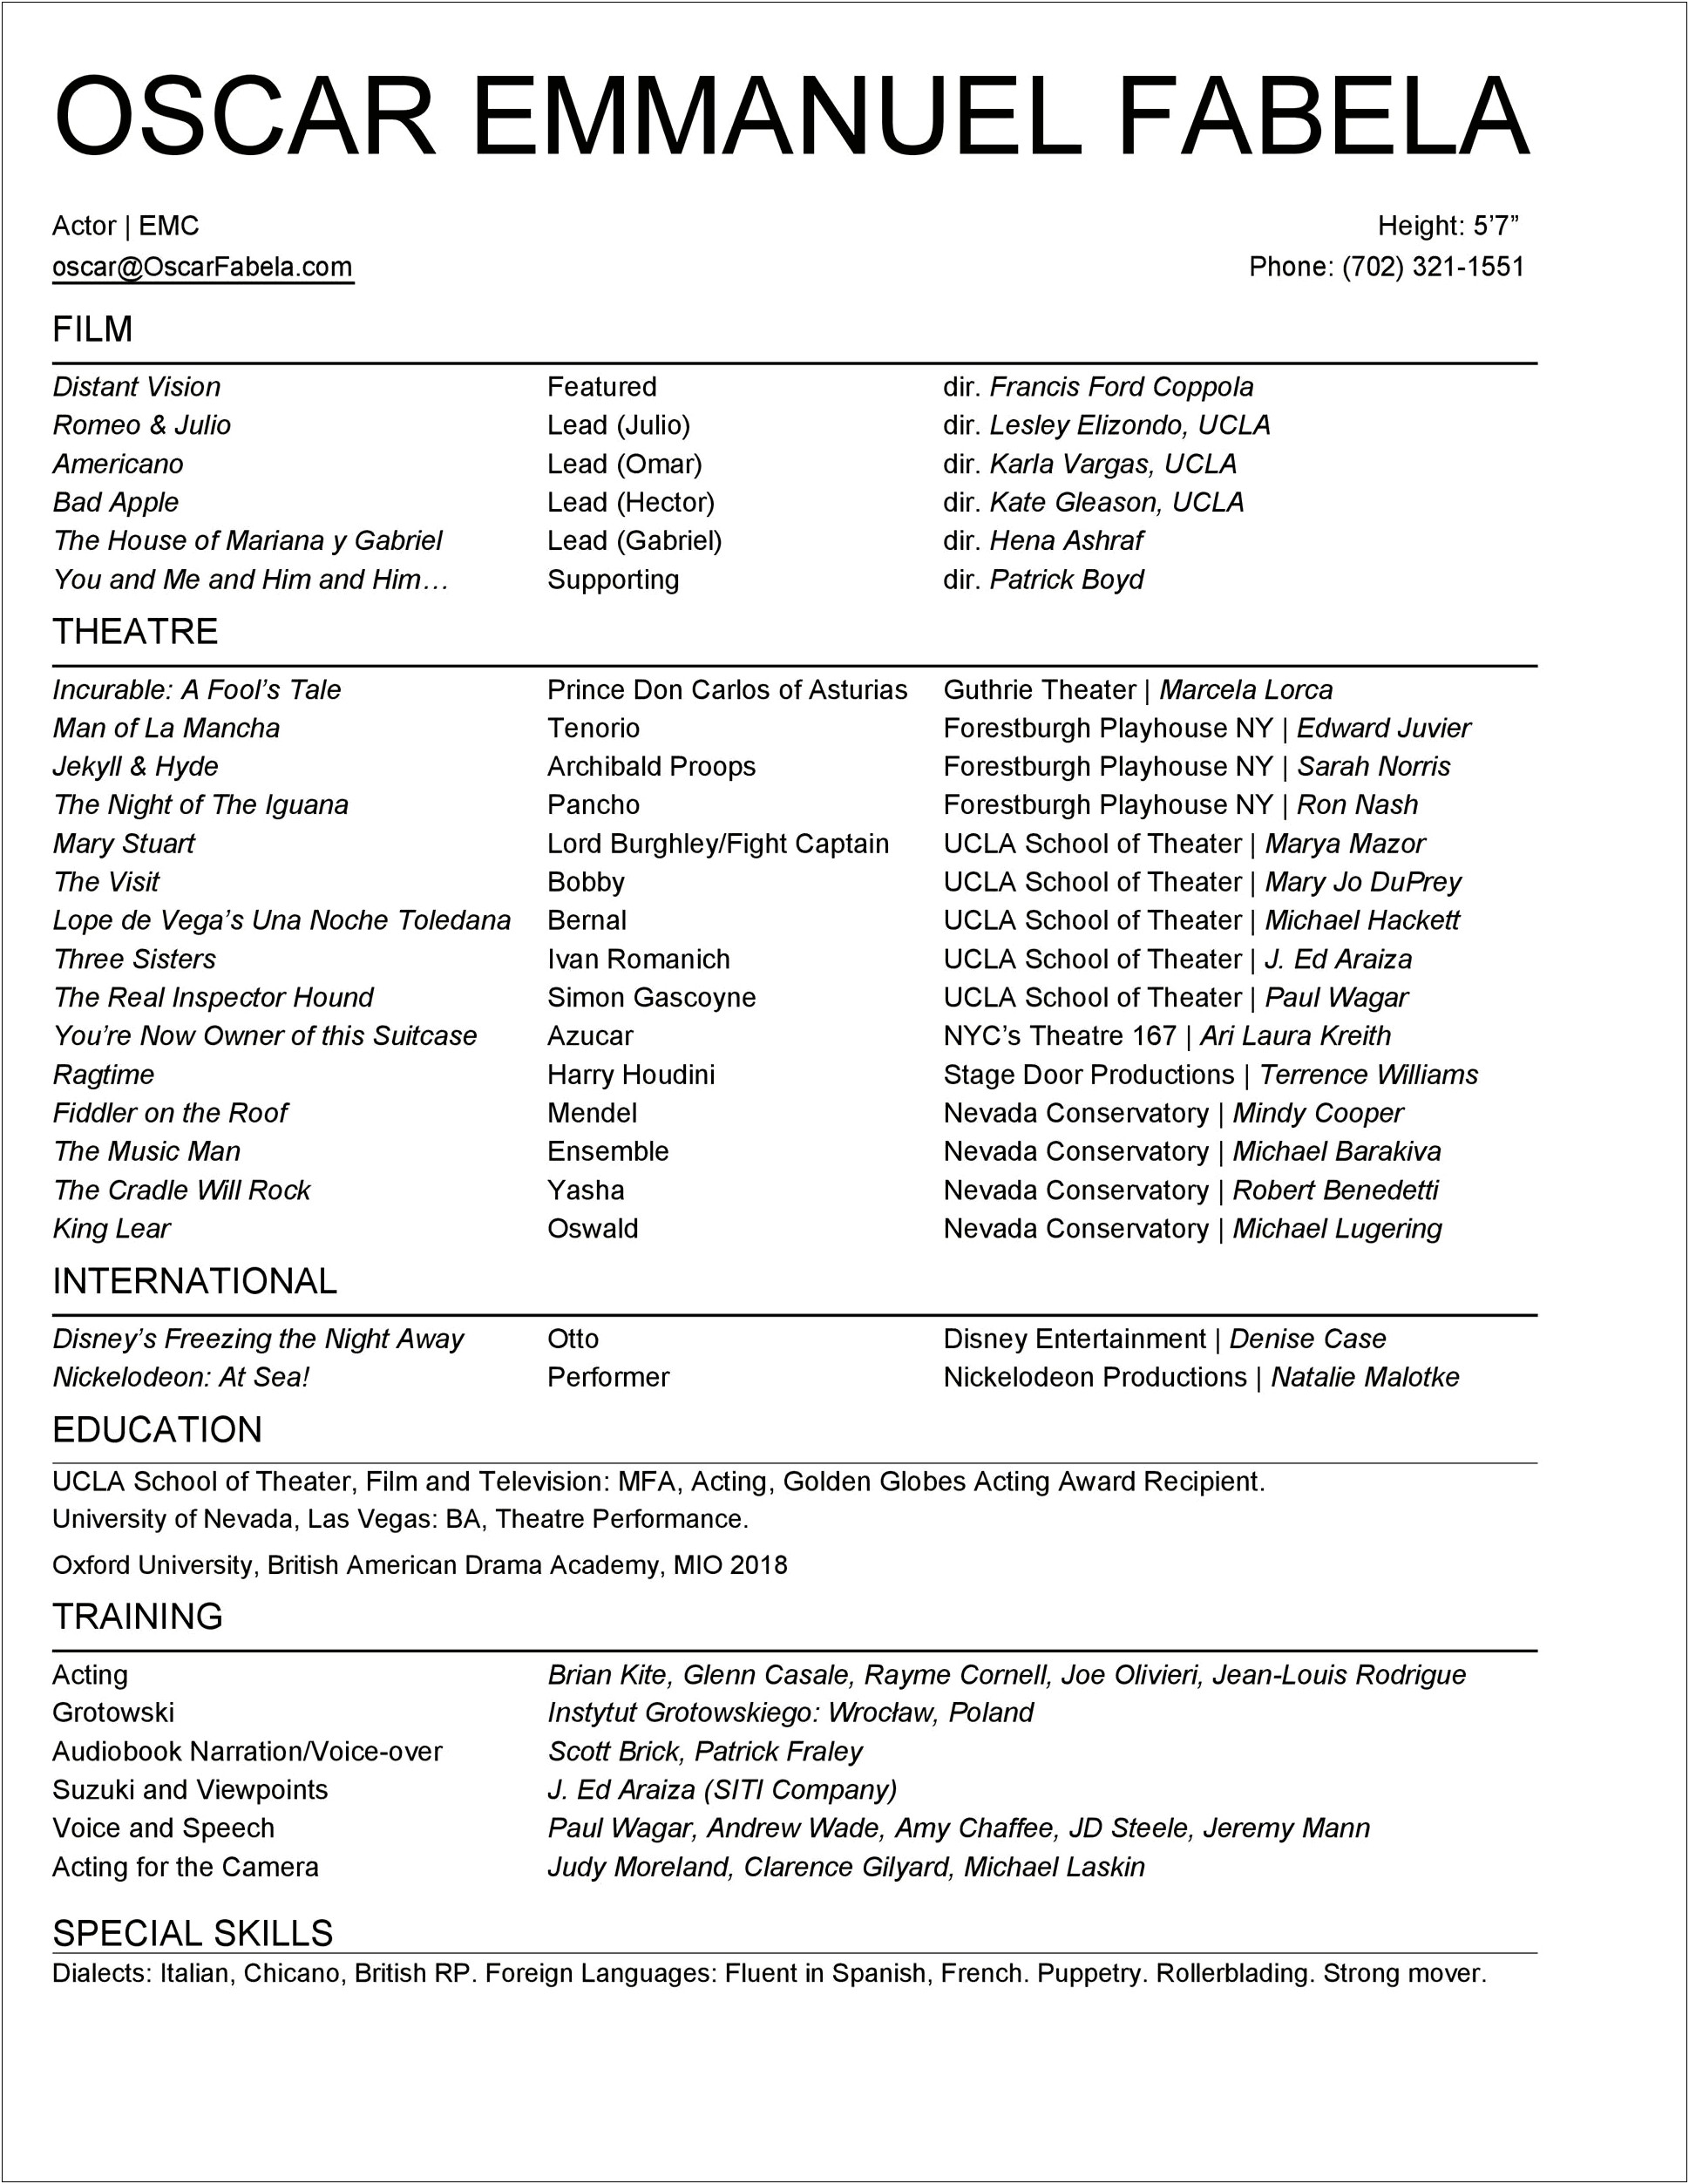 Example Of Special Skills On Theatre Resume